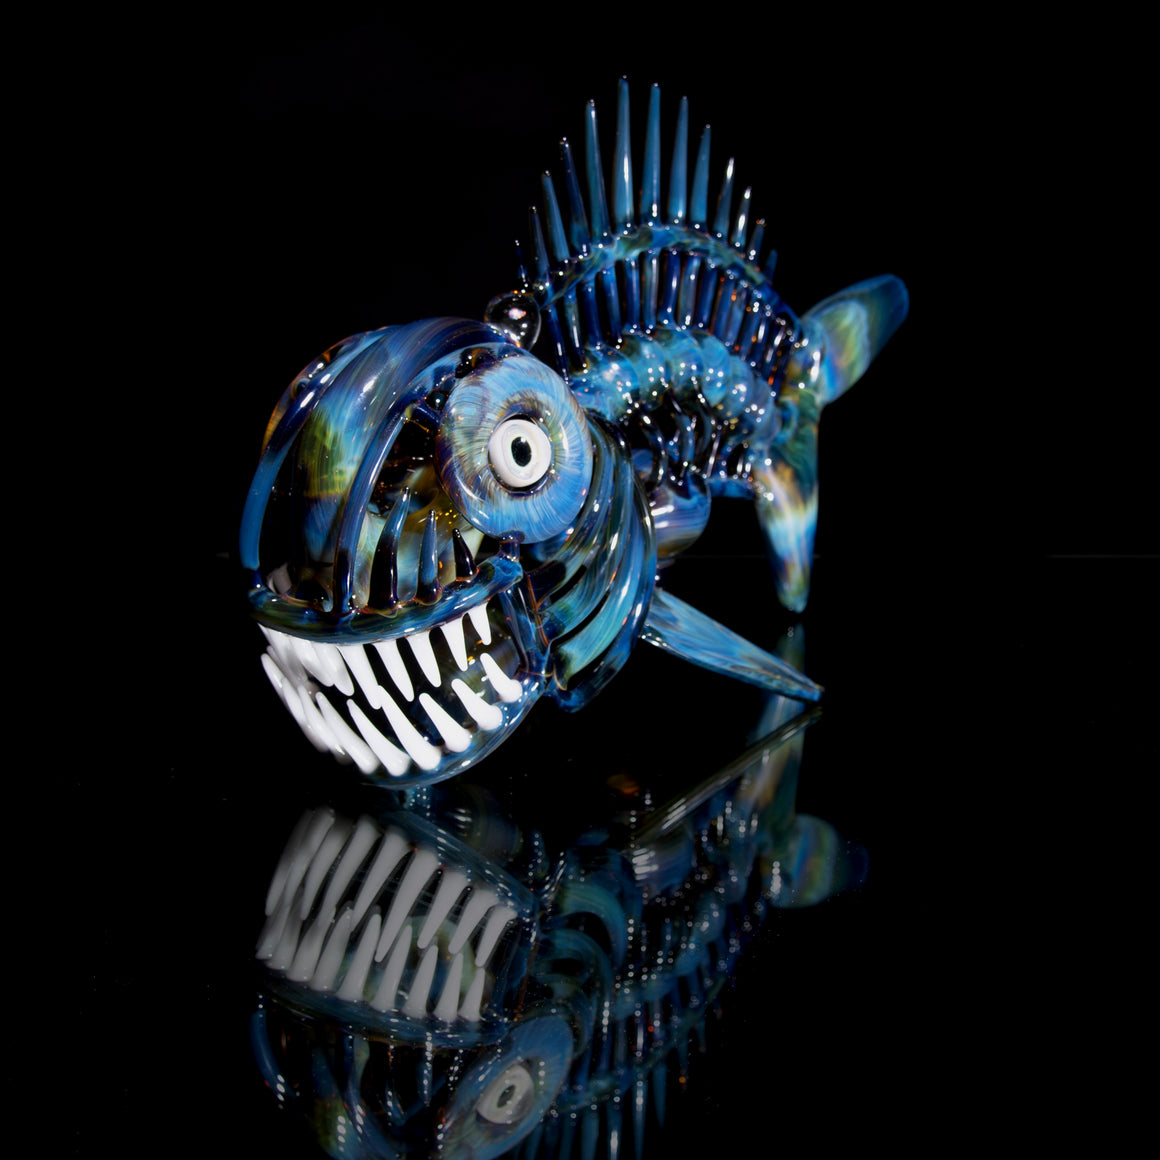 Armoured Prehistoric Fish w/ Spinner - Deppe's Darkness